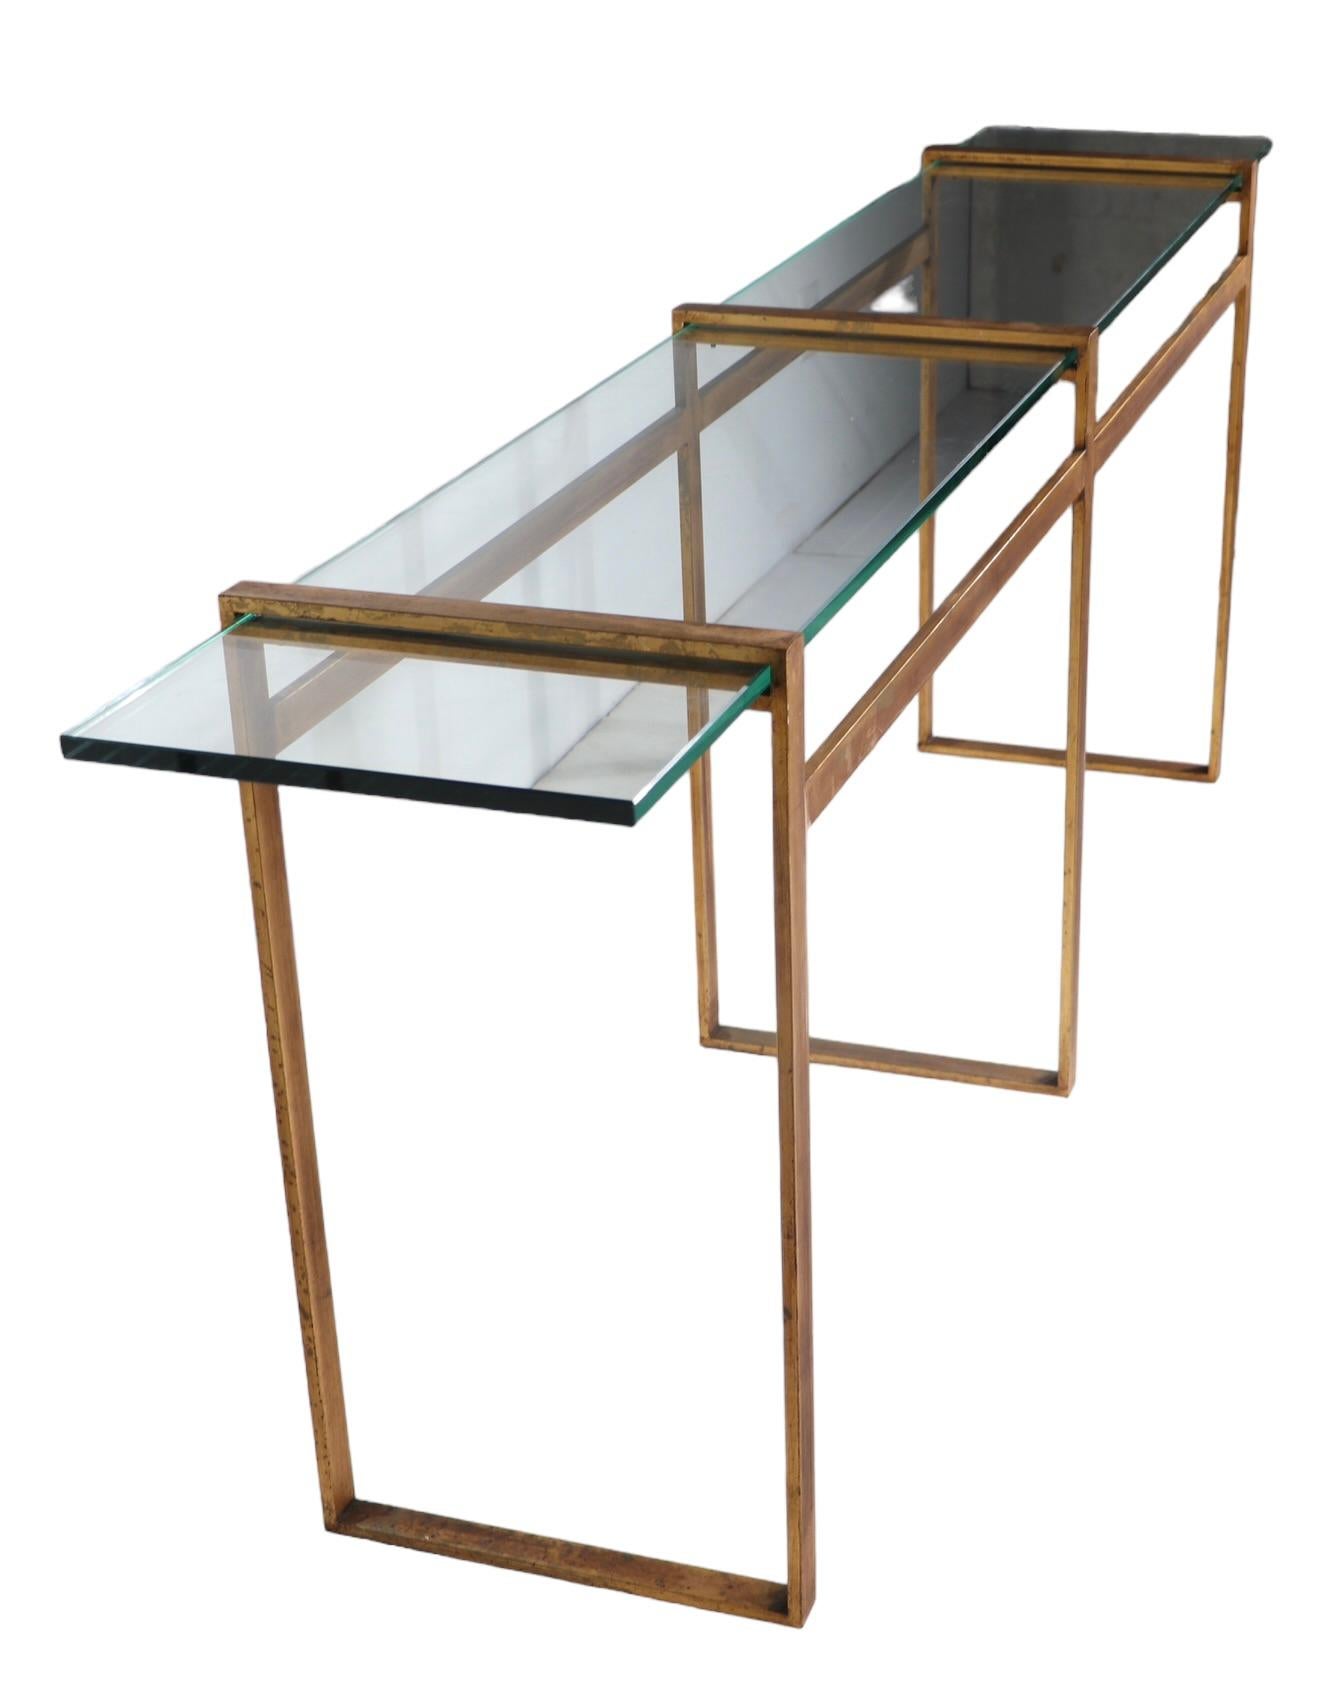 Large Modernist Metal and Glass Console in Faux Gilt Finish c 1970’s For Sale 3